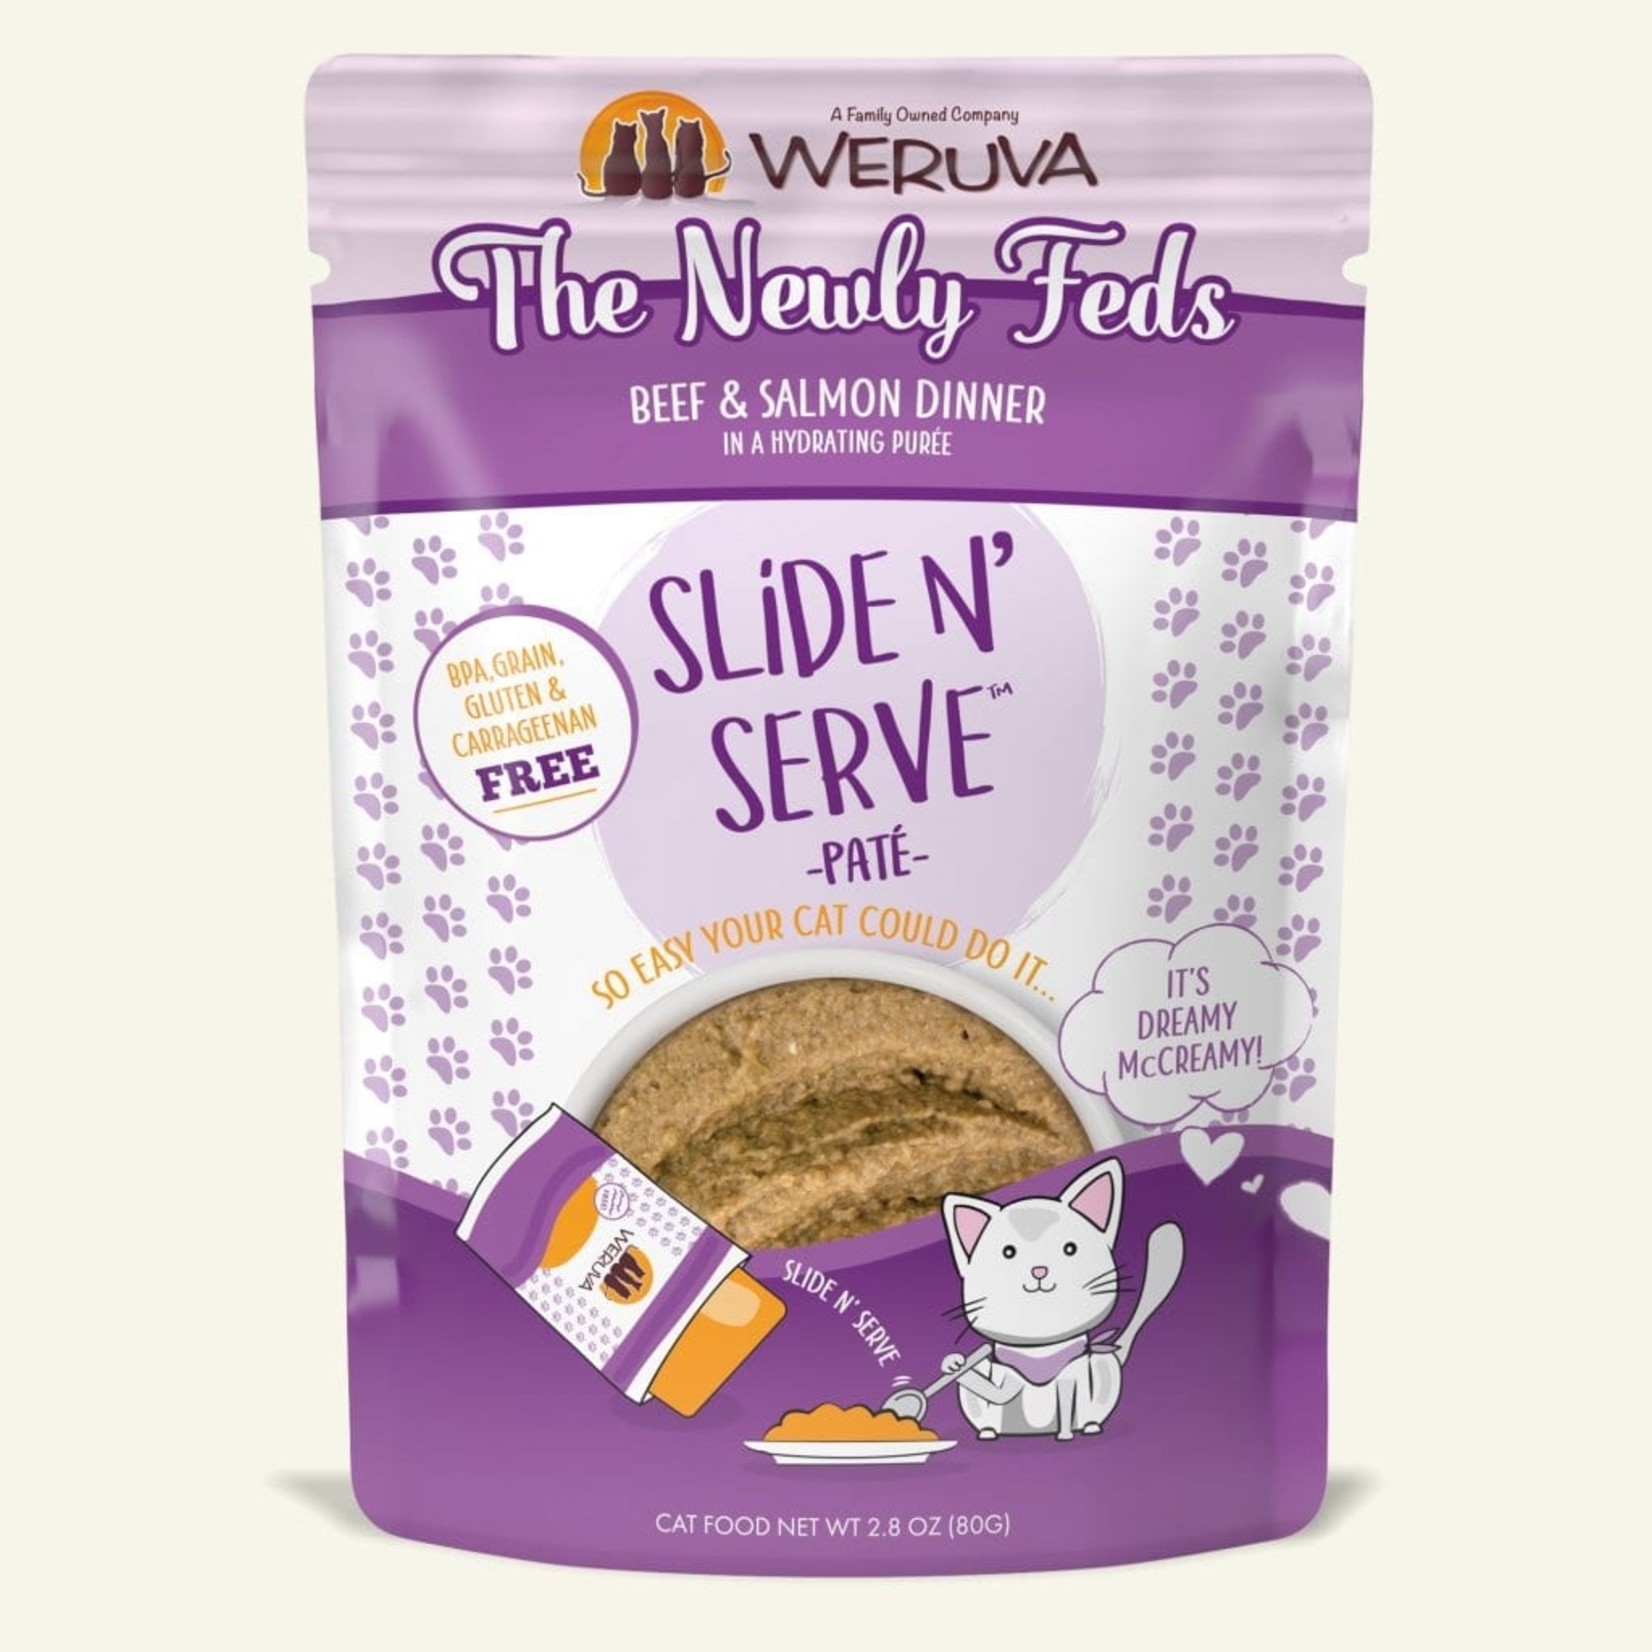 Weruva Weruva Wet Cat Food Slide & Serve Pate The Newly Feds Beef & Salmon Dinner in a Hydrating Puree 2.8oz Pouch